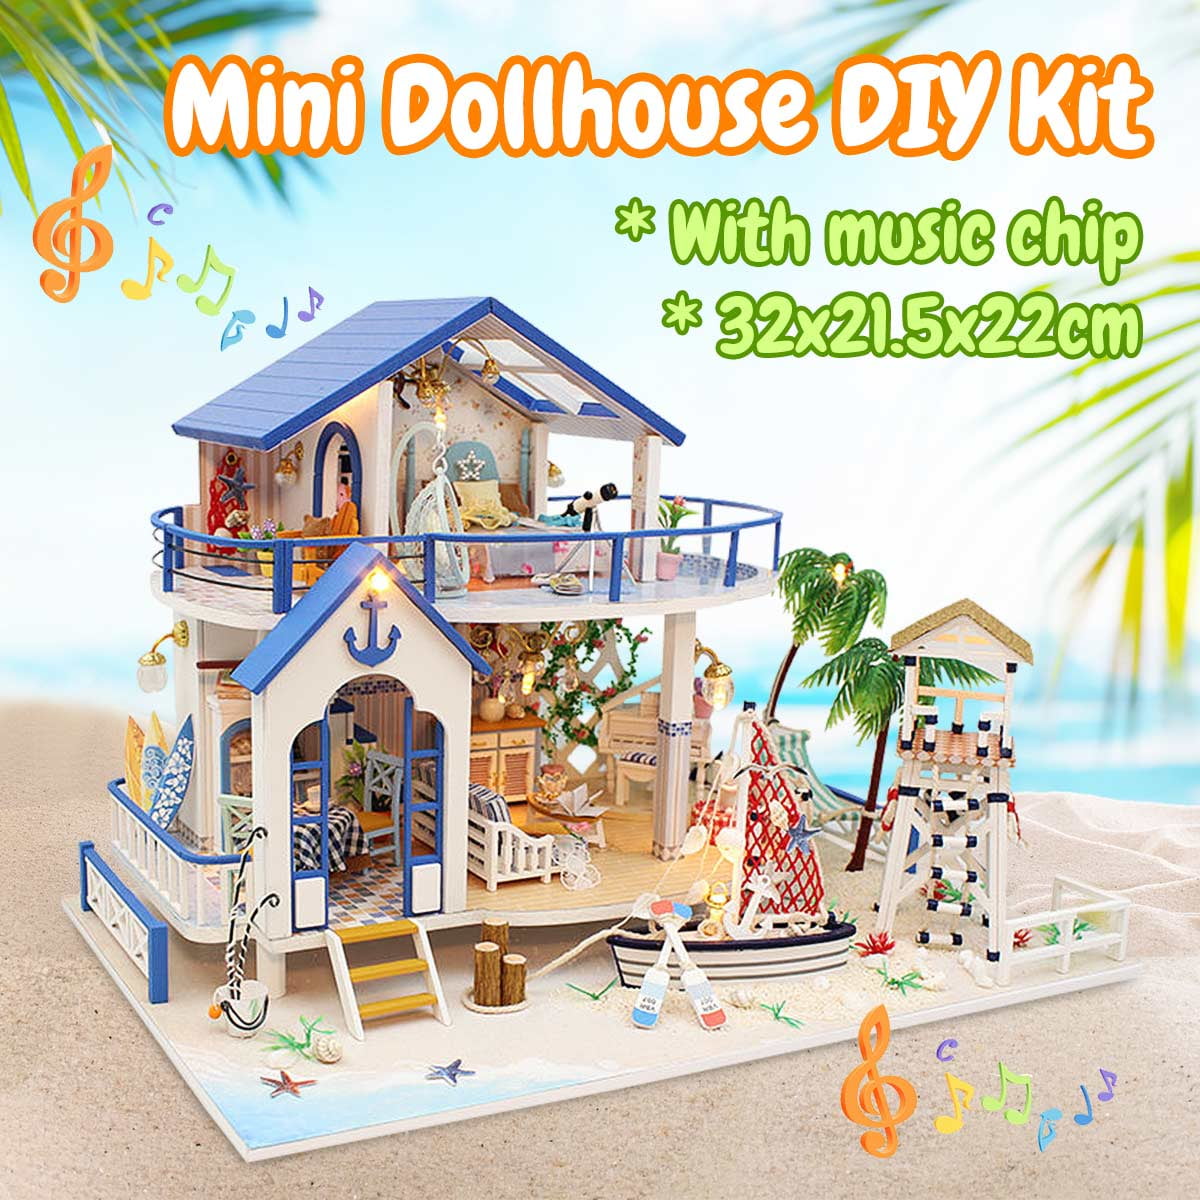 build a house toy kit